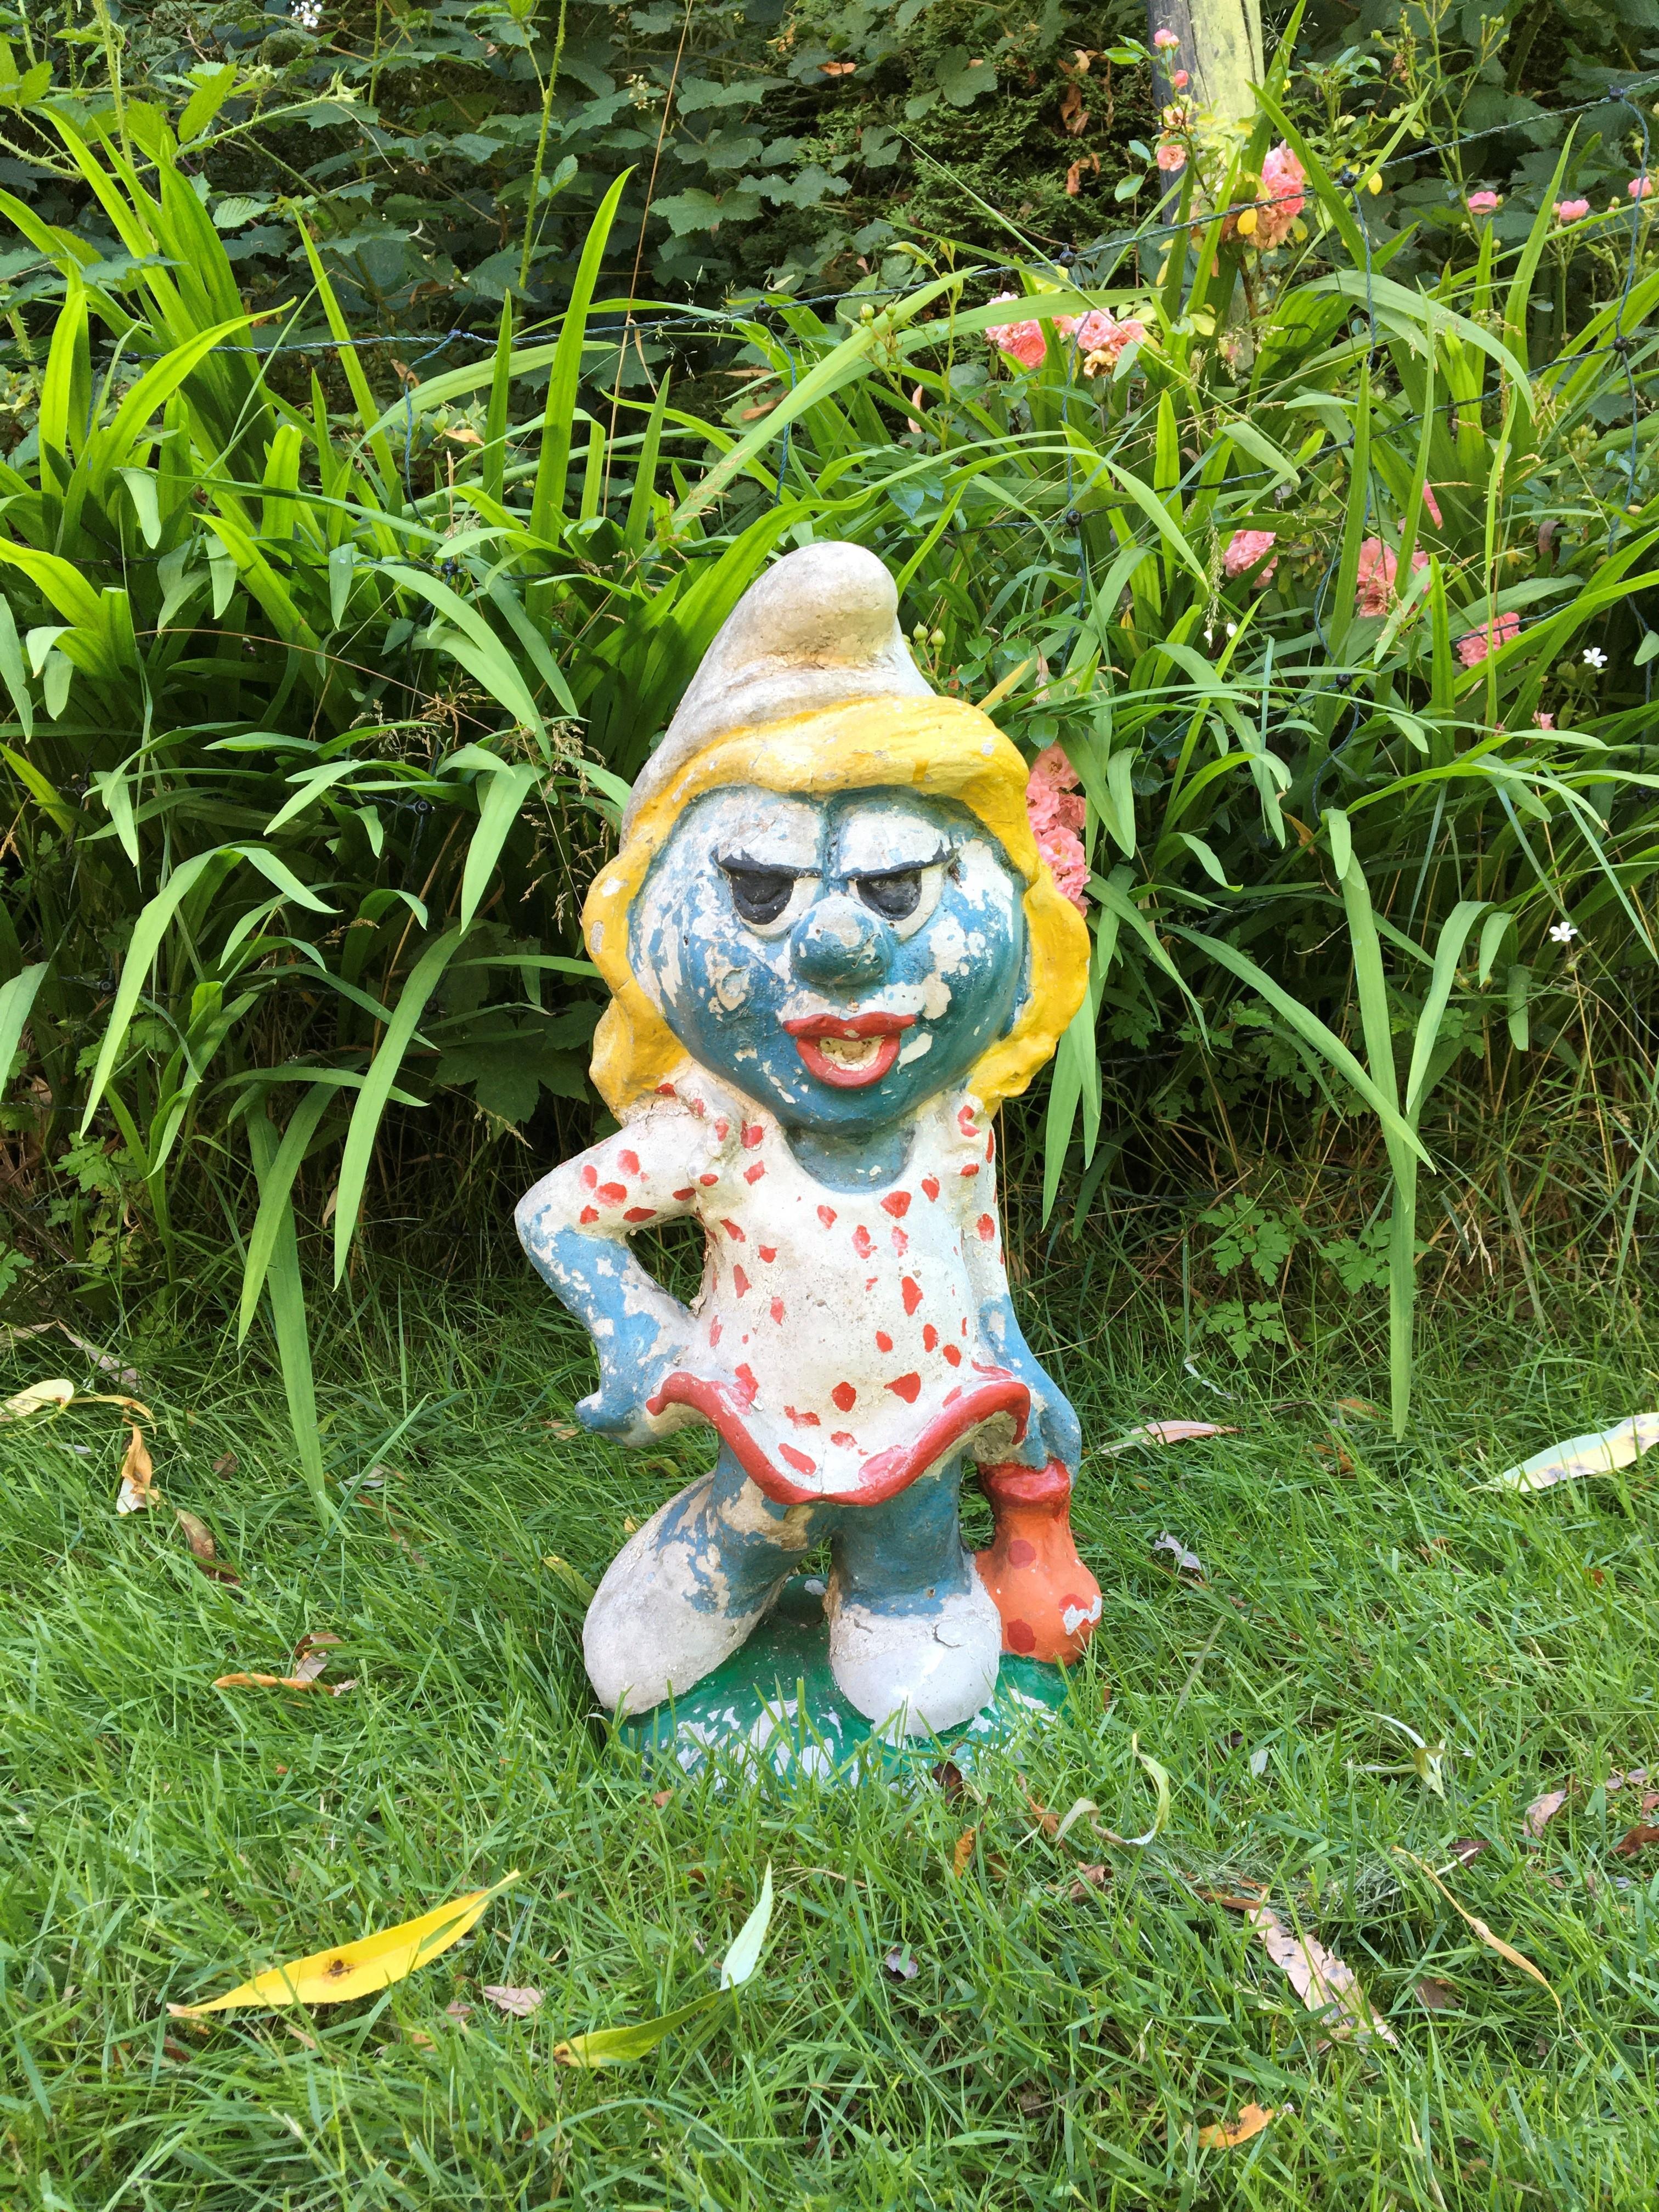 Concrete Smurfette garden statue.
Smurfette is known from The Smurfs; she was the first female smurf in smurf village. A character created by Peyo and in the story created by Gargamel.

A decorative statue for a collector and fan of The Smurfs.